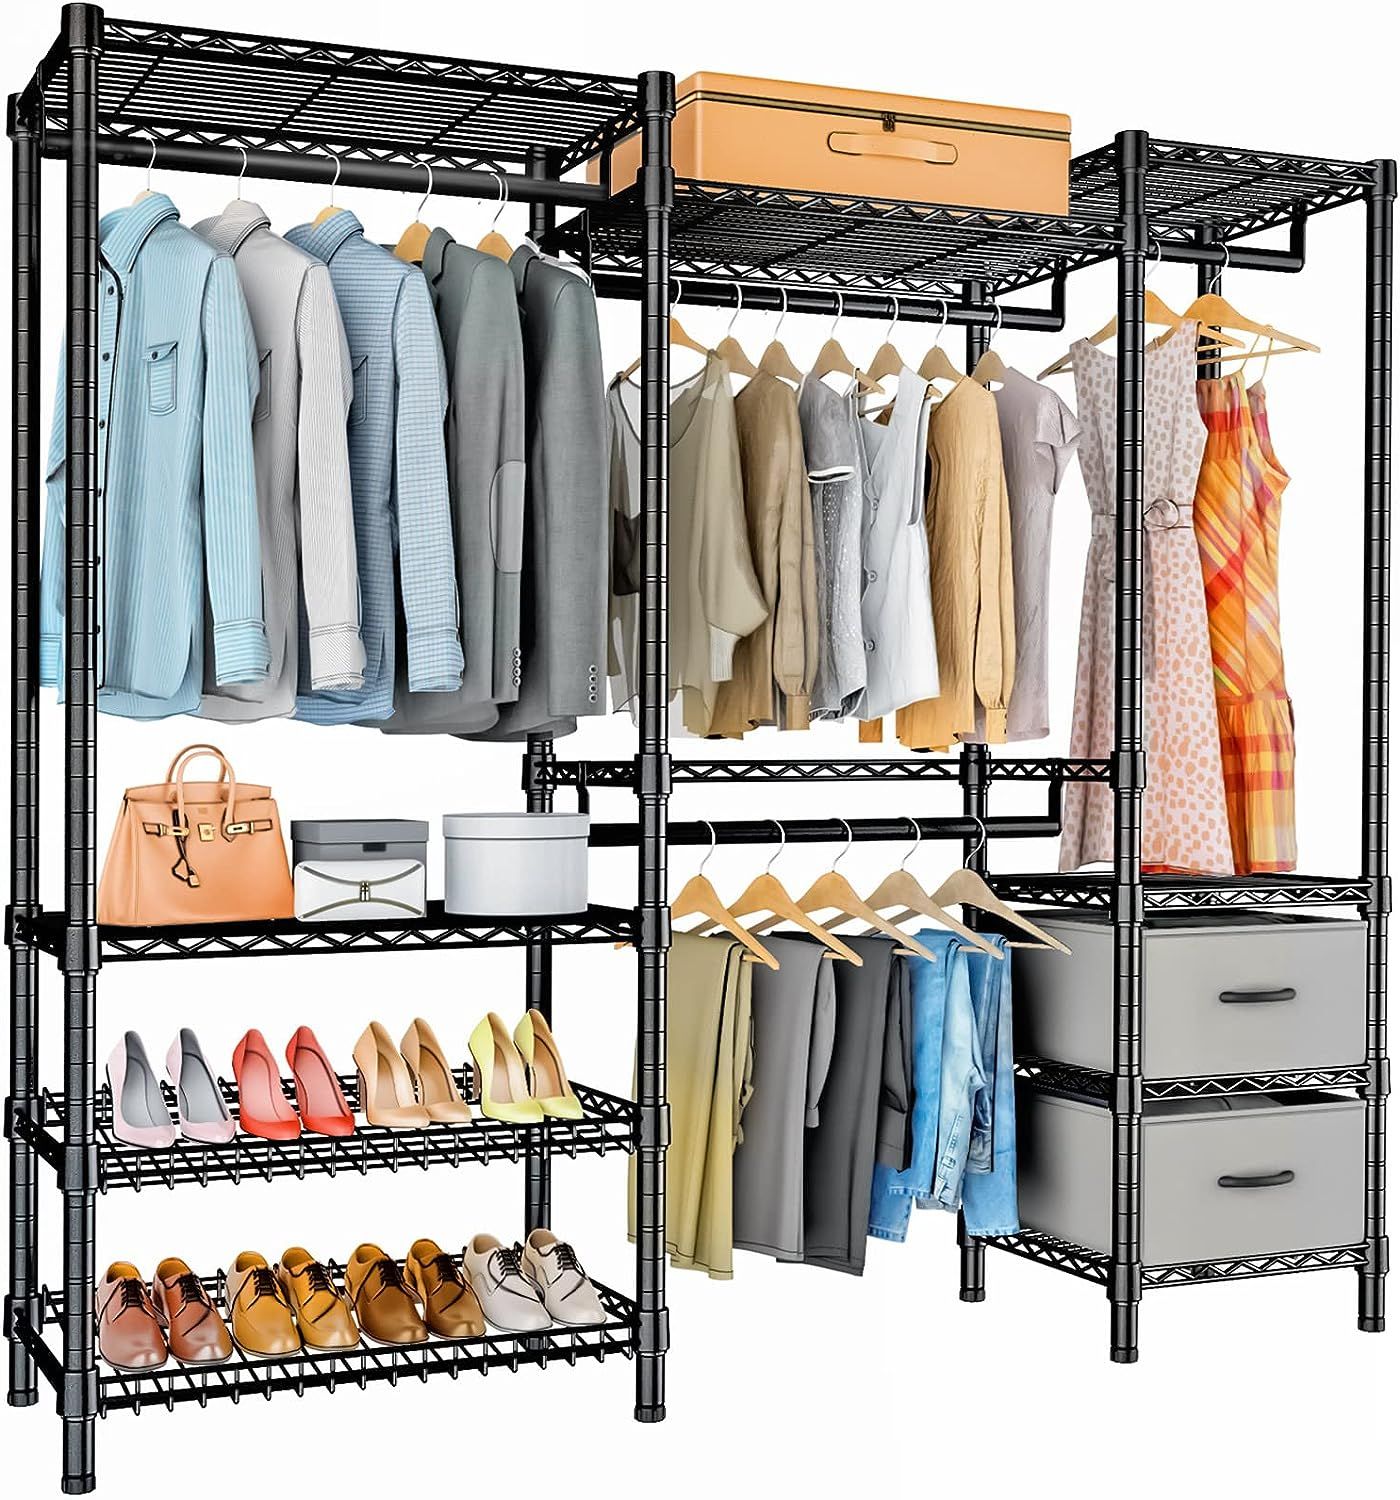 Vipek V8 Wire Garment Rack 5 Tiers Heavy Duty India | Ubuy With Regard To 5 Tiers Wardrobes (View 14 of 15)